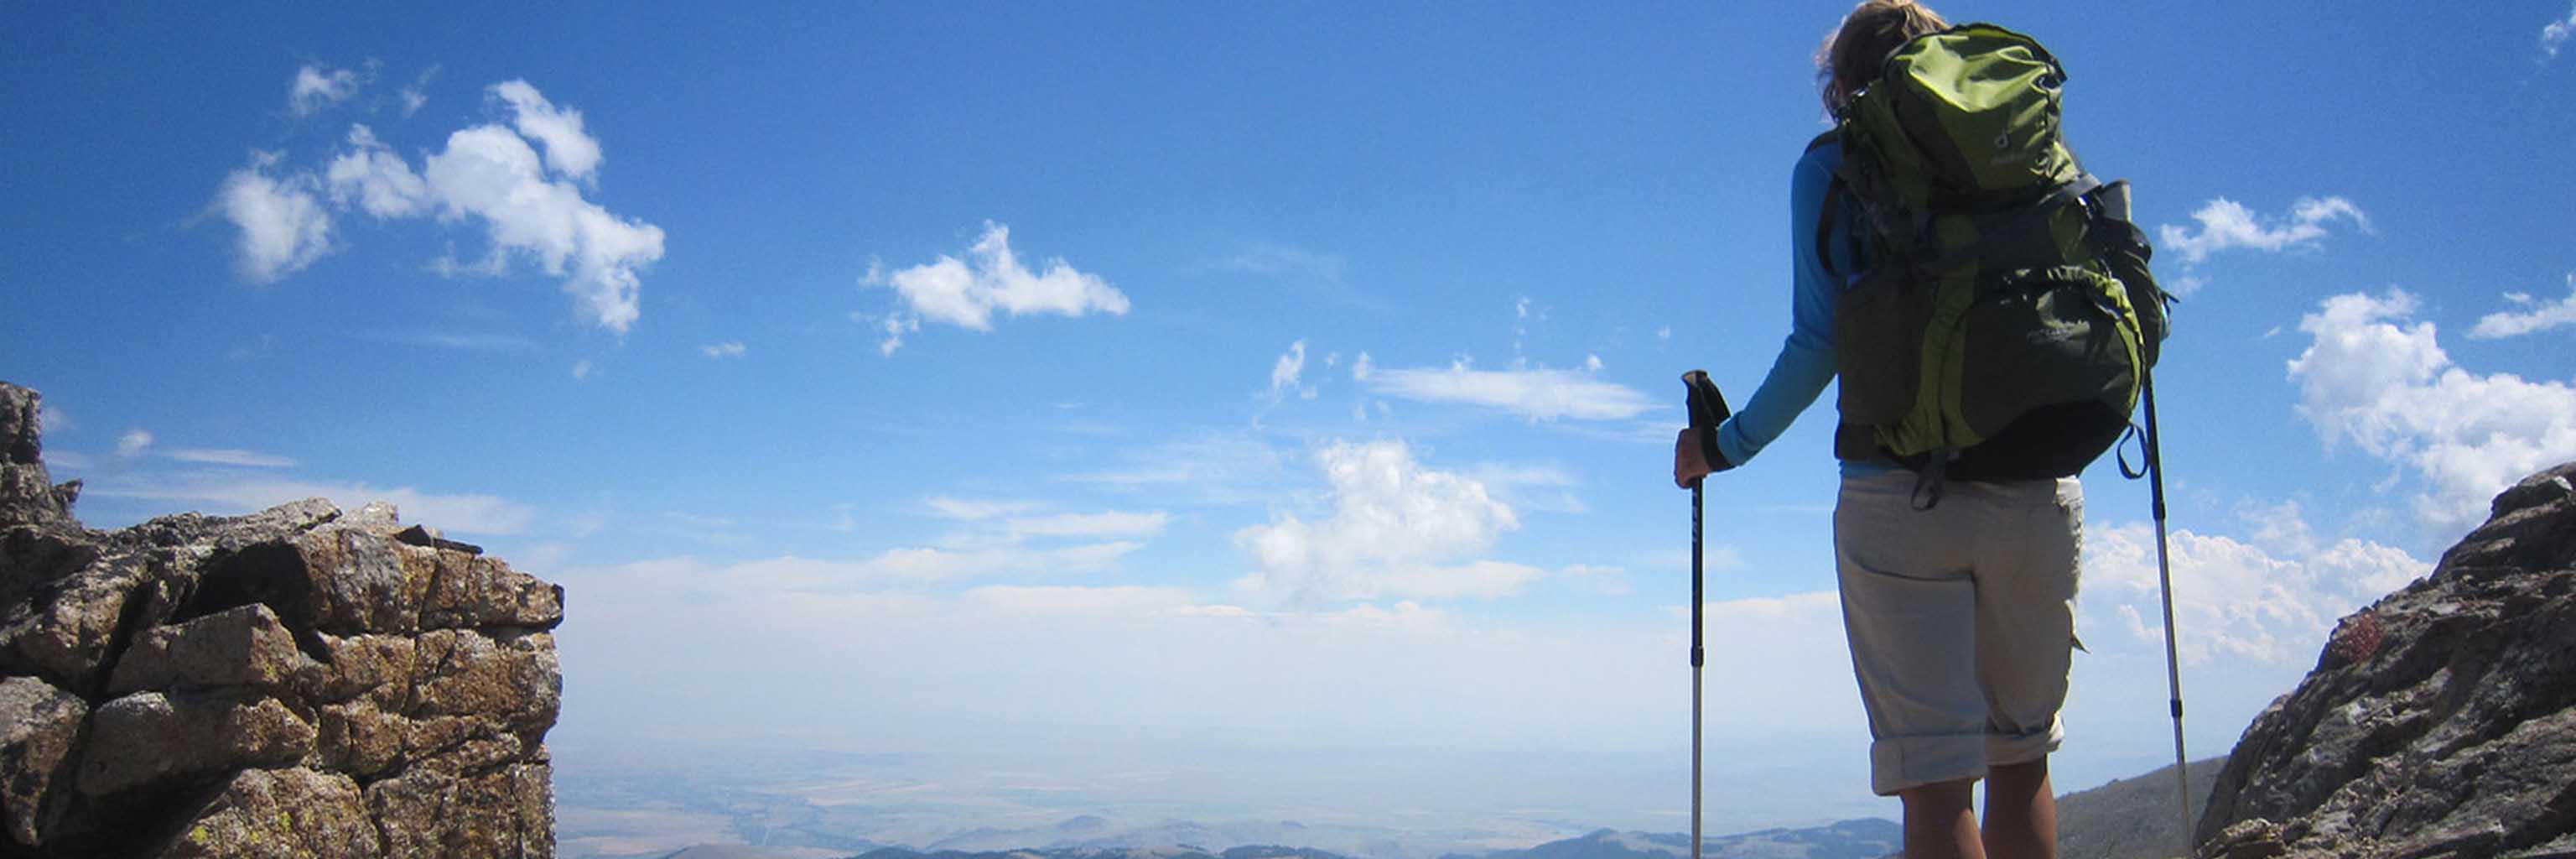 hiker with hiking sticks look out onto the landscape from a mountain top